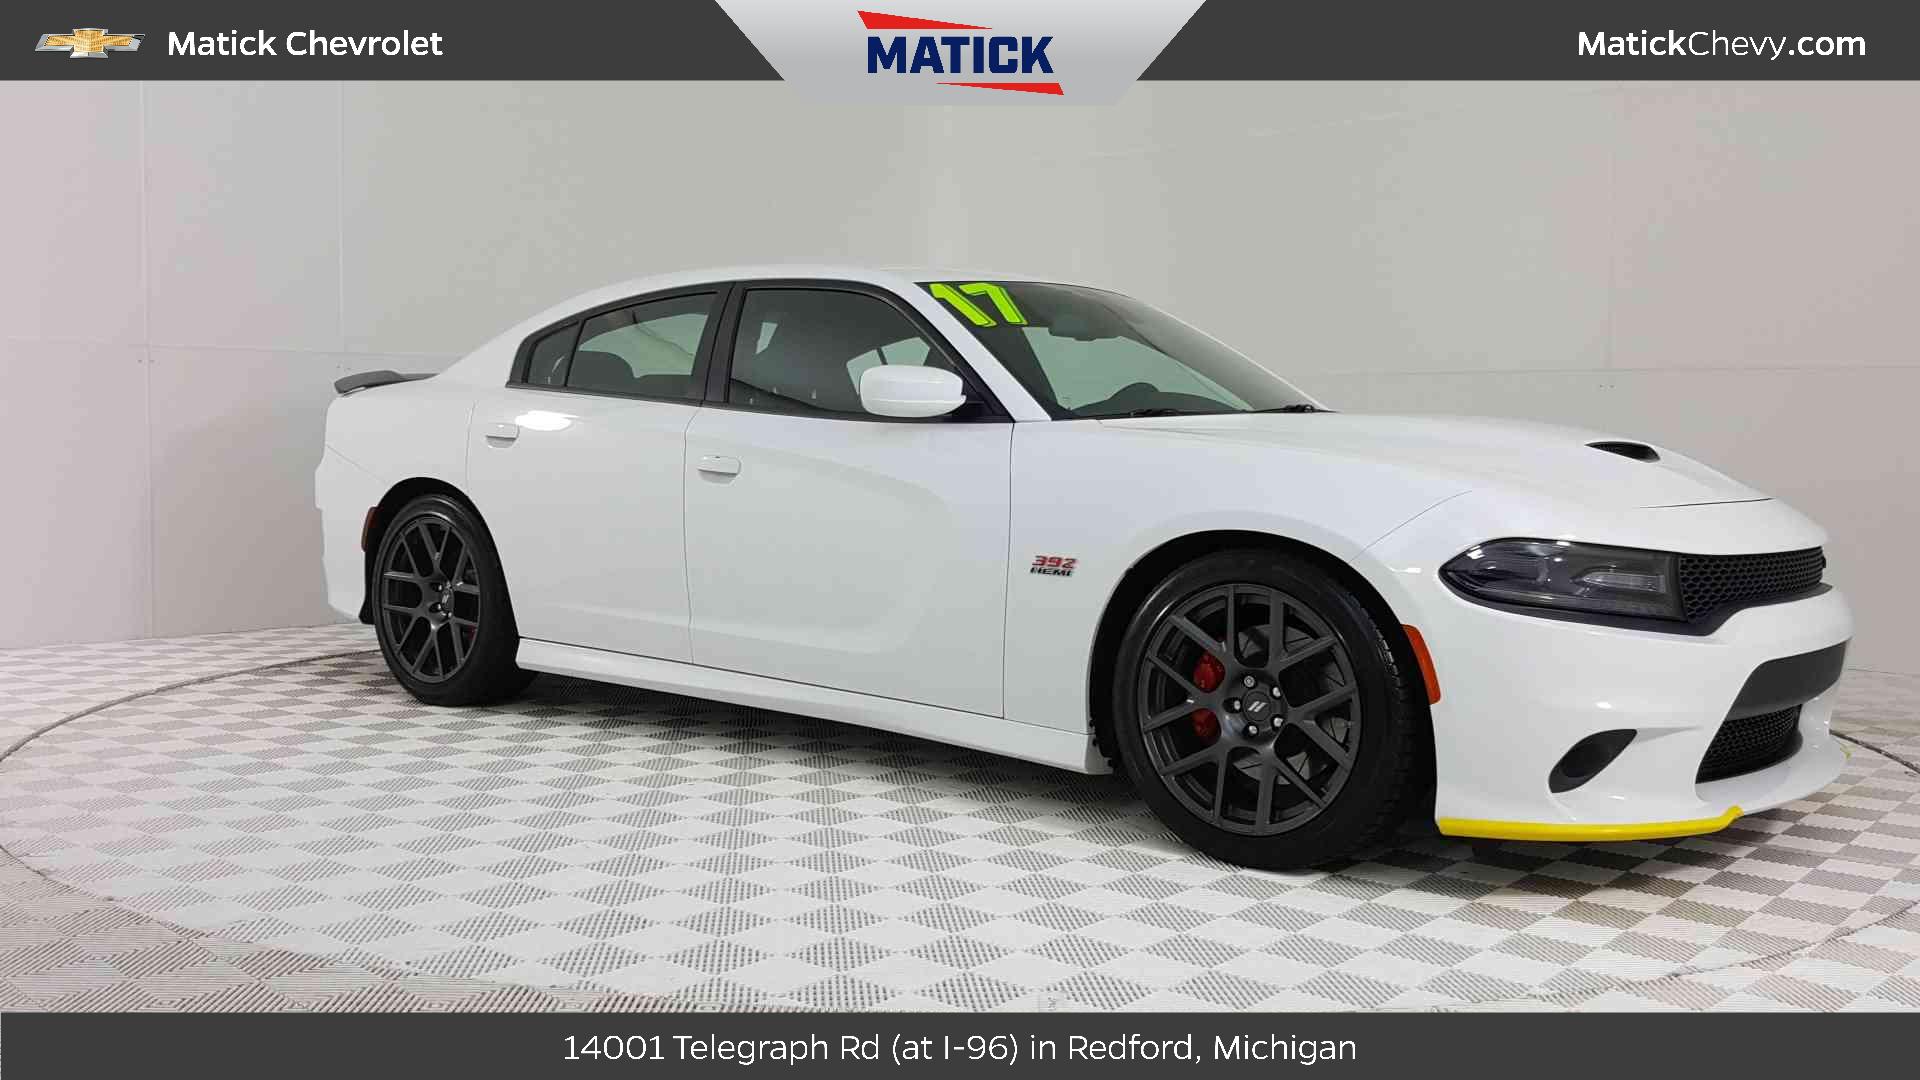 Vehicle of Week: 2017 Charger from Matick